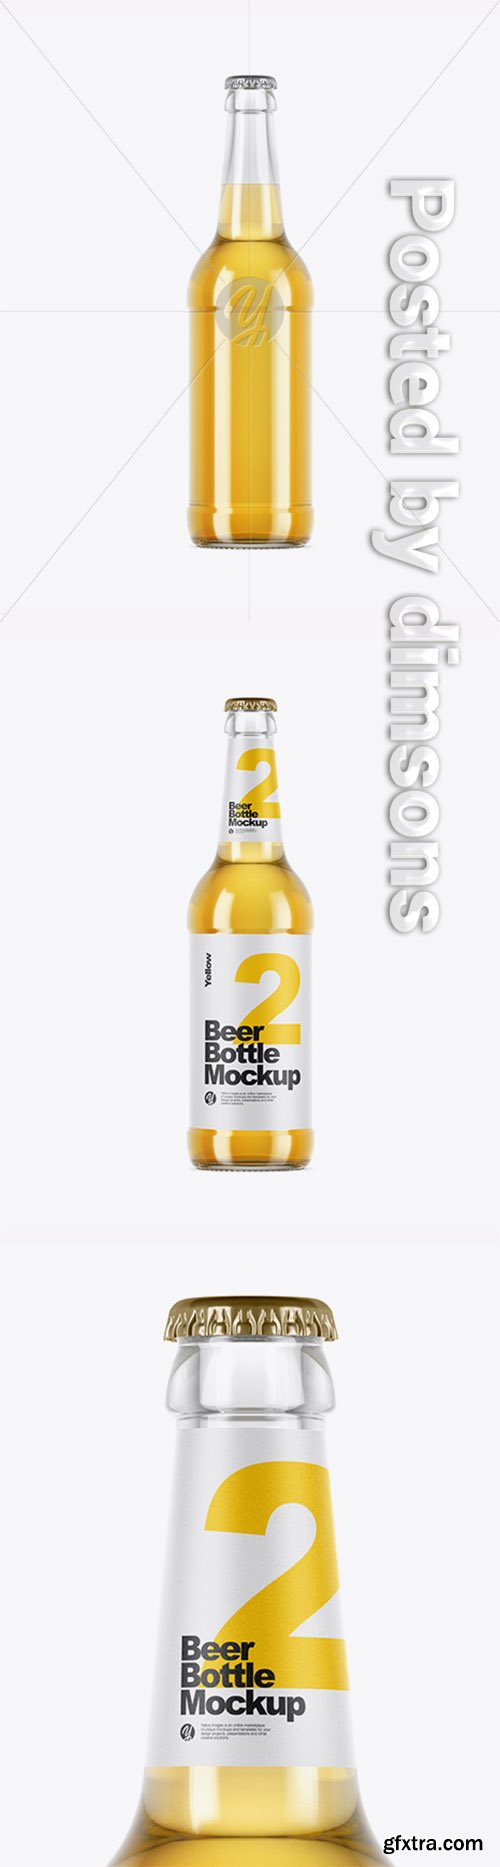 Clear Glass Bottle With Lager Beer Mockup 28778